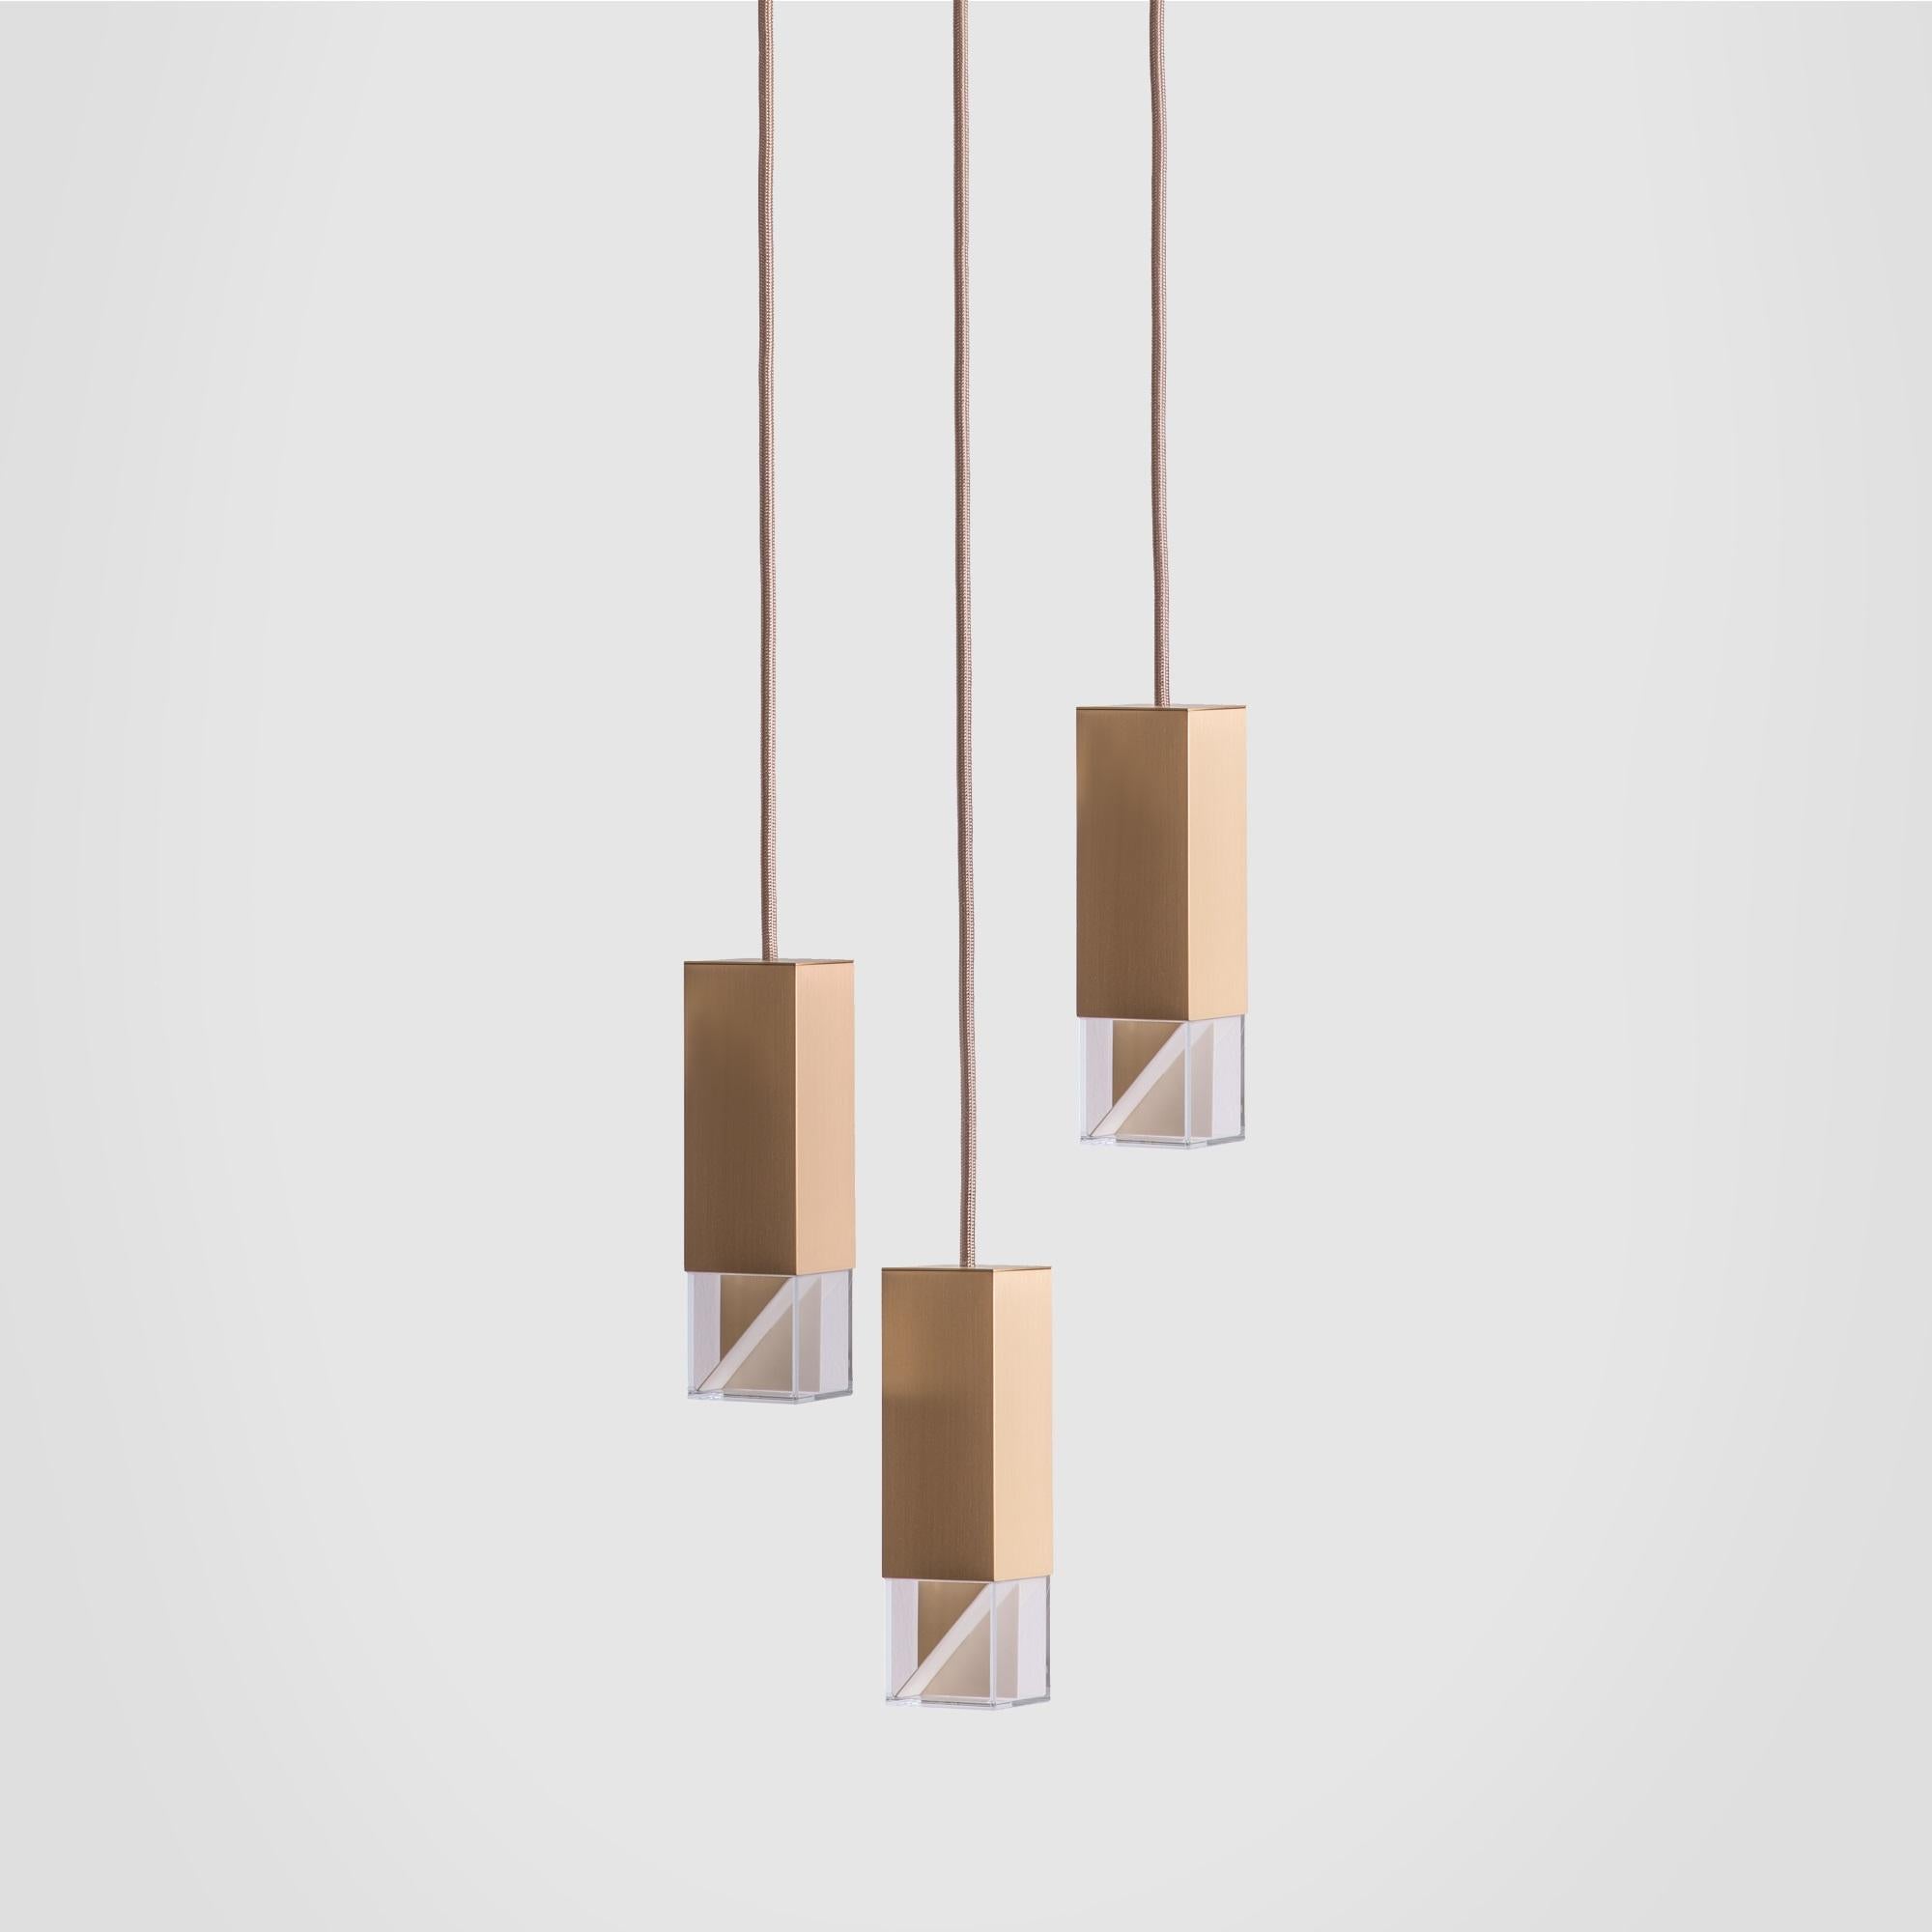 Enriching any interior with elegance, this chandelier is composed of three elements that hang at different heights with adjustable-length fabric cables (2 m max). Perfect in an entryway, above a dining table or a kitchen island, each rectangular